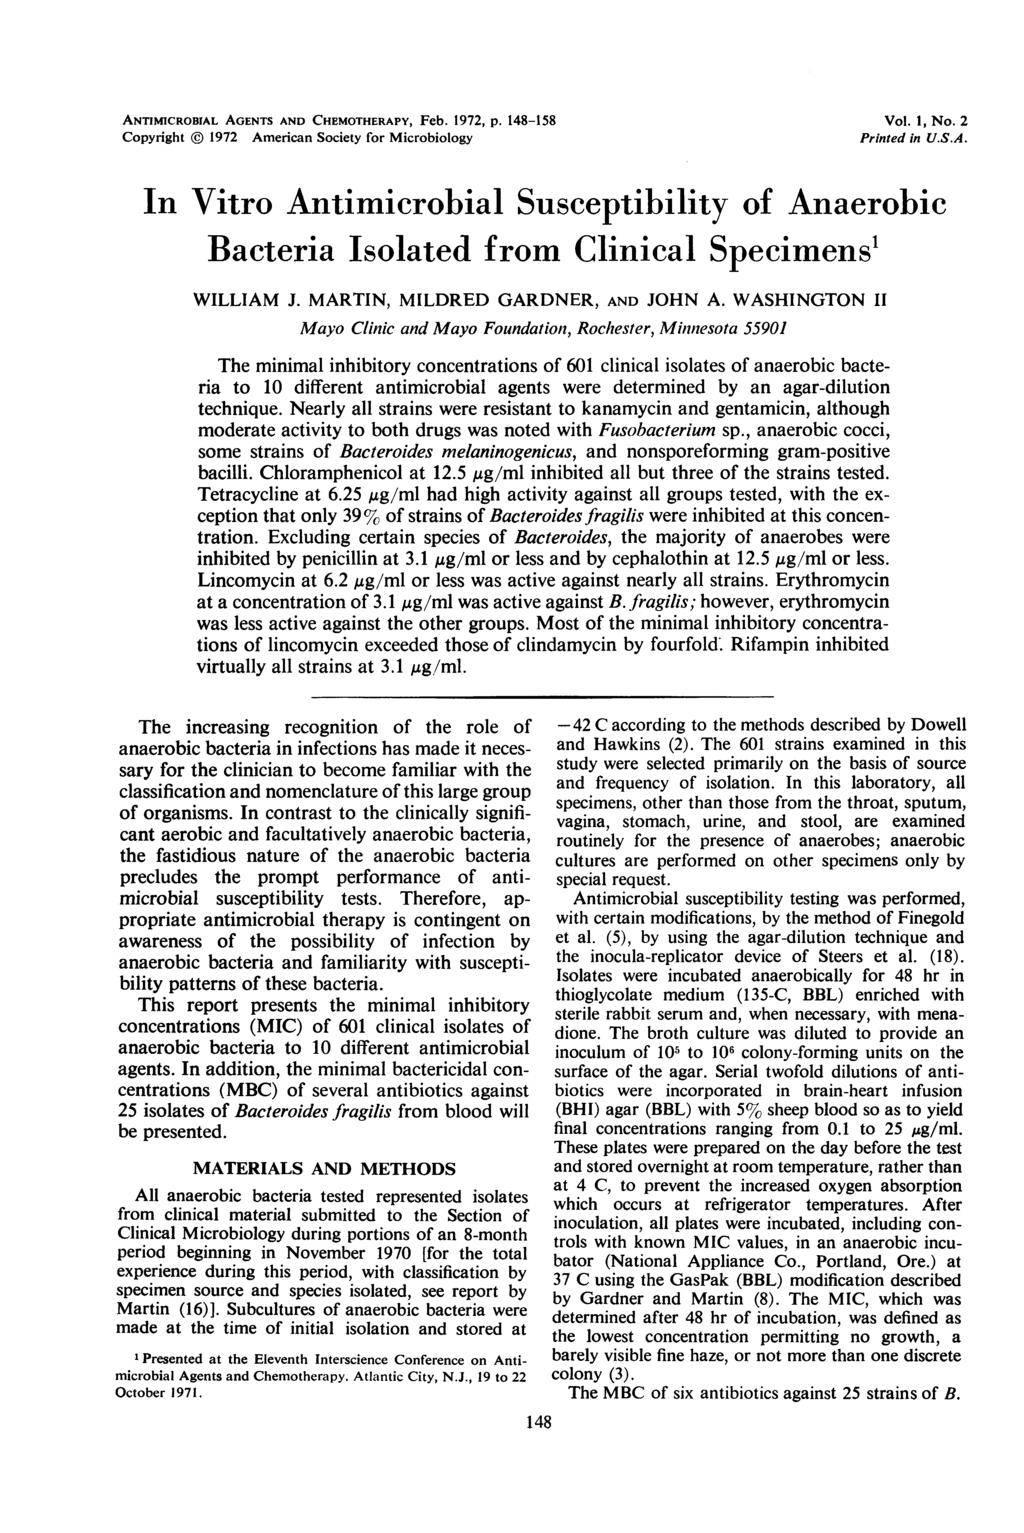 ANTMCROBAL AGENT AND CHEMOTHERAPY, Feb., p. 8-8 Copyright American ociety for Microbiology Vol., No. Printed in U..A. n Vitro Antimicrobial usceptibility of Anaerobic Bacteria solated from Clinical pecimens WLLAM J.